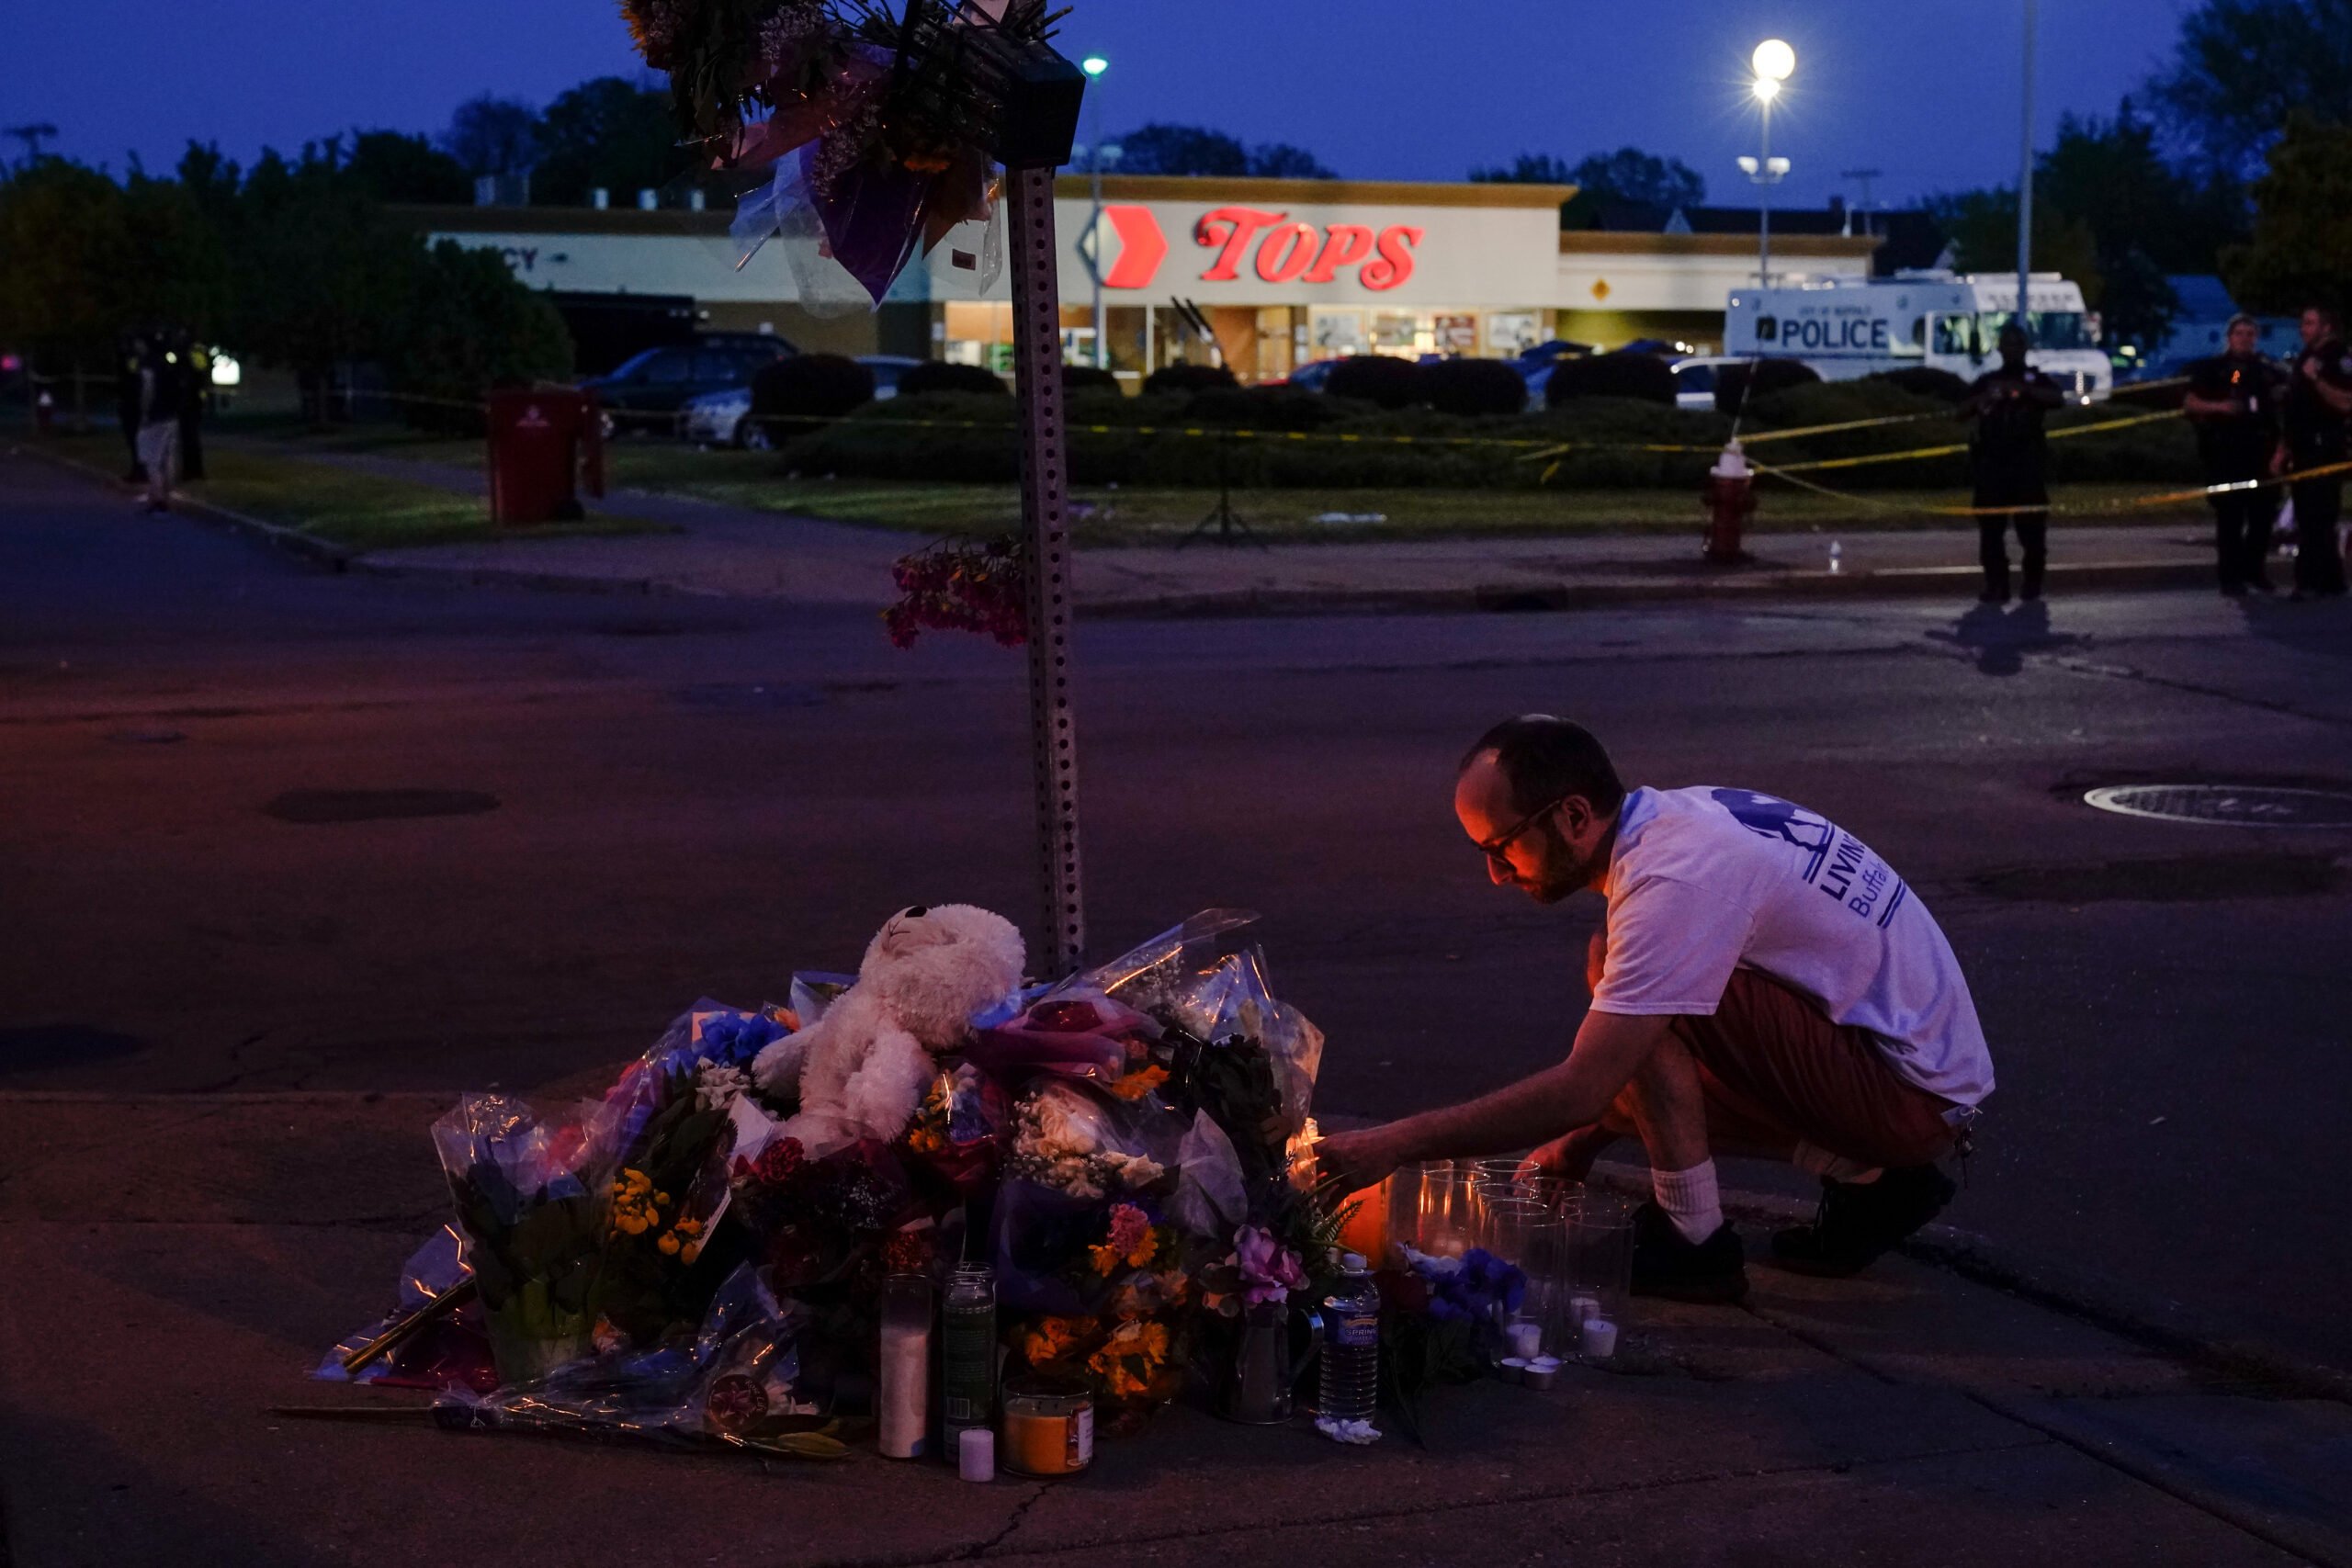 FILE - A person pays his respects outside the scene of a shooting at a supermarket, in Buffalo, N.Y., Sunday, May 15, 2022. The Tops Friendly Markets where 13 people were gunned down by a white gunman is set to reopen its doors Thursday, July 14 two months after the racist attack. (AP Photo/Matt Rourke, File)